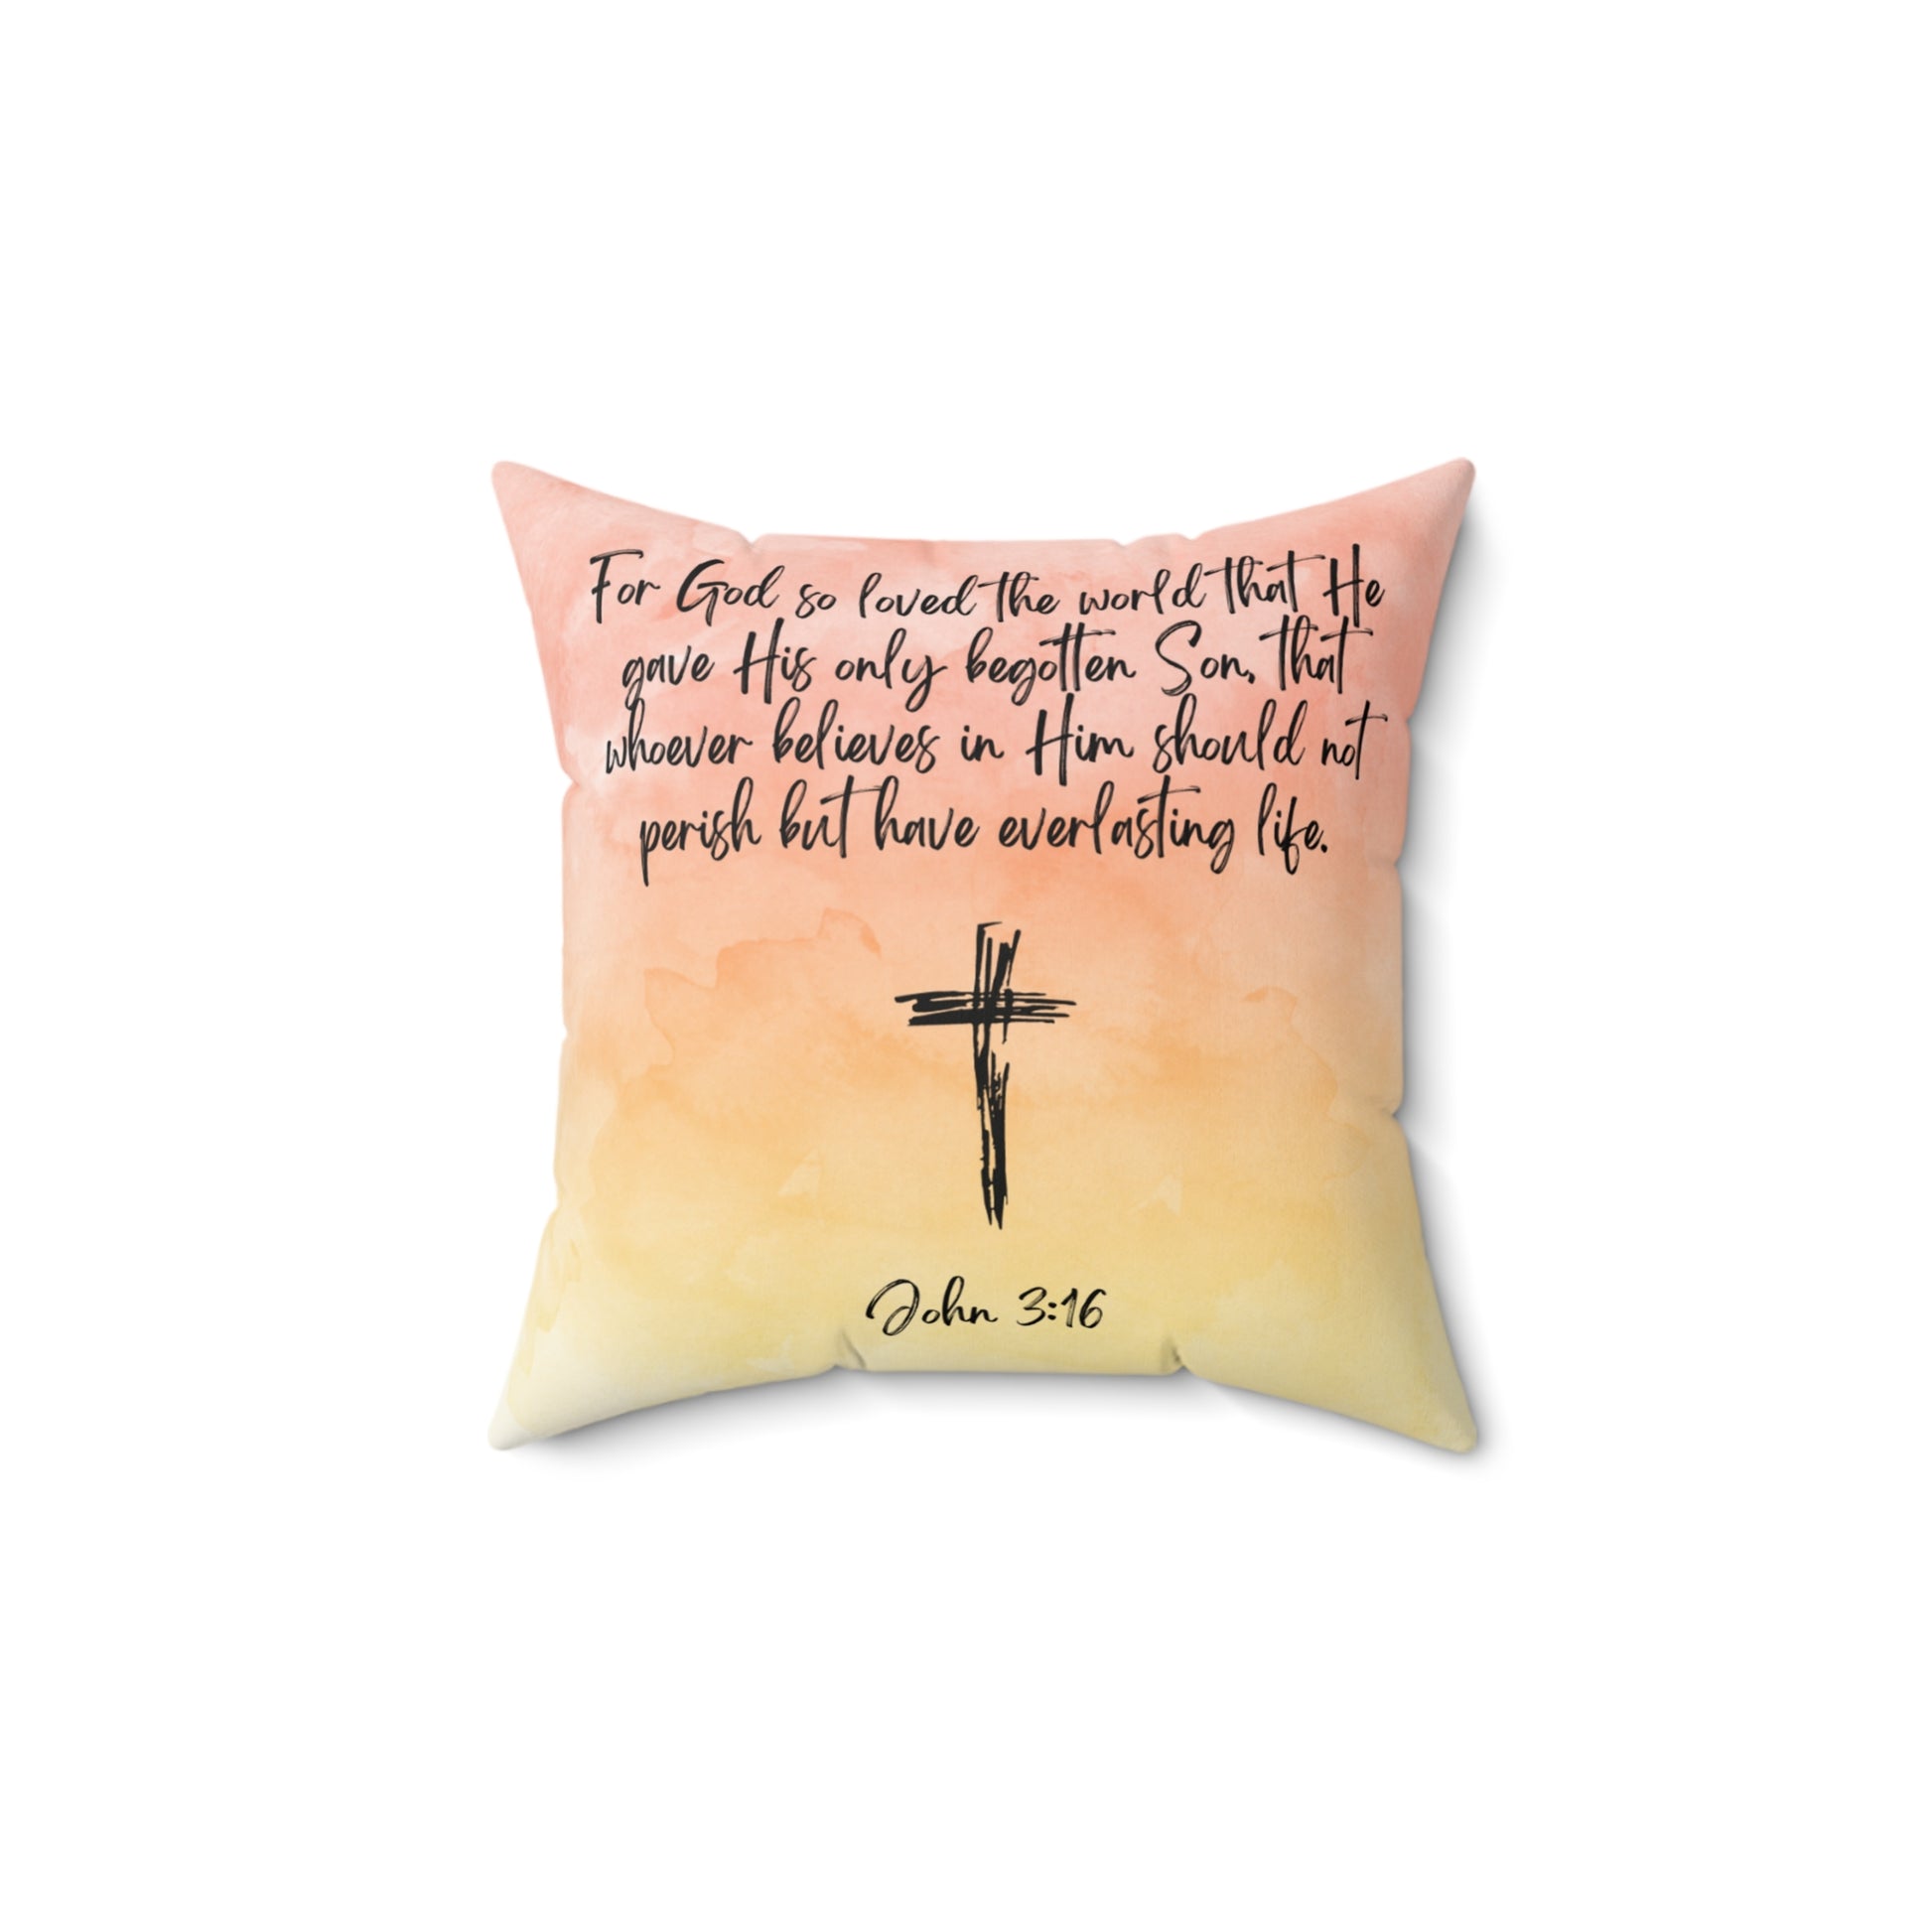 "John 3:16" Throw Pillow - Weave Got Gifts - Unique Gifts You Won’t Find Anywhere Else!